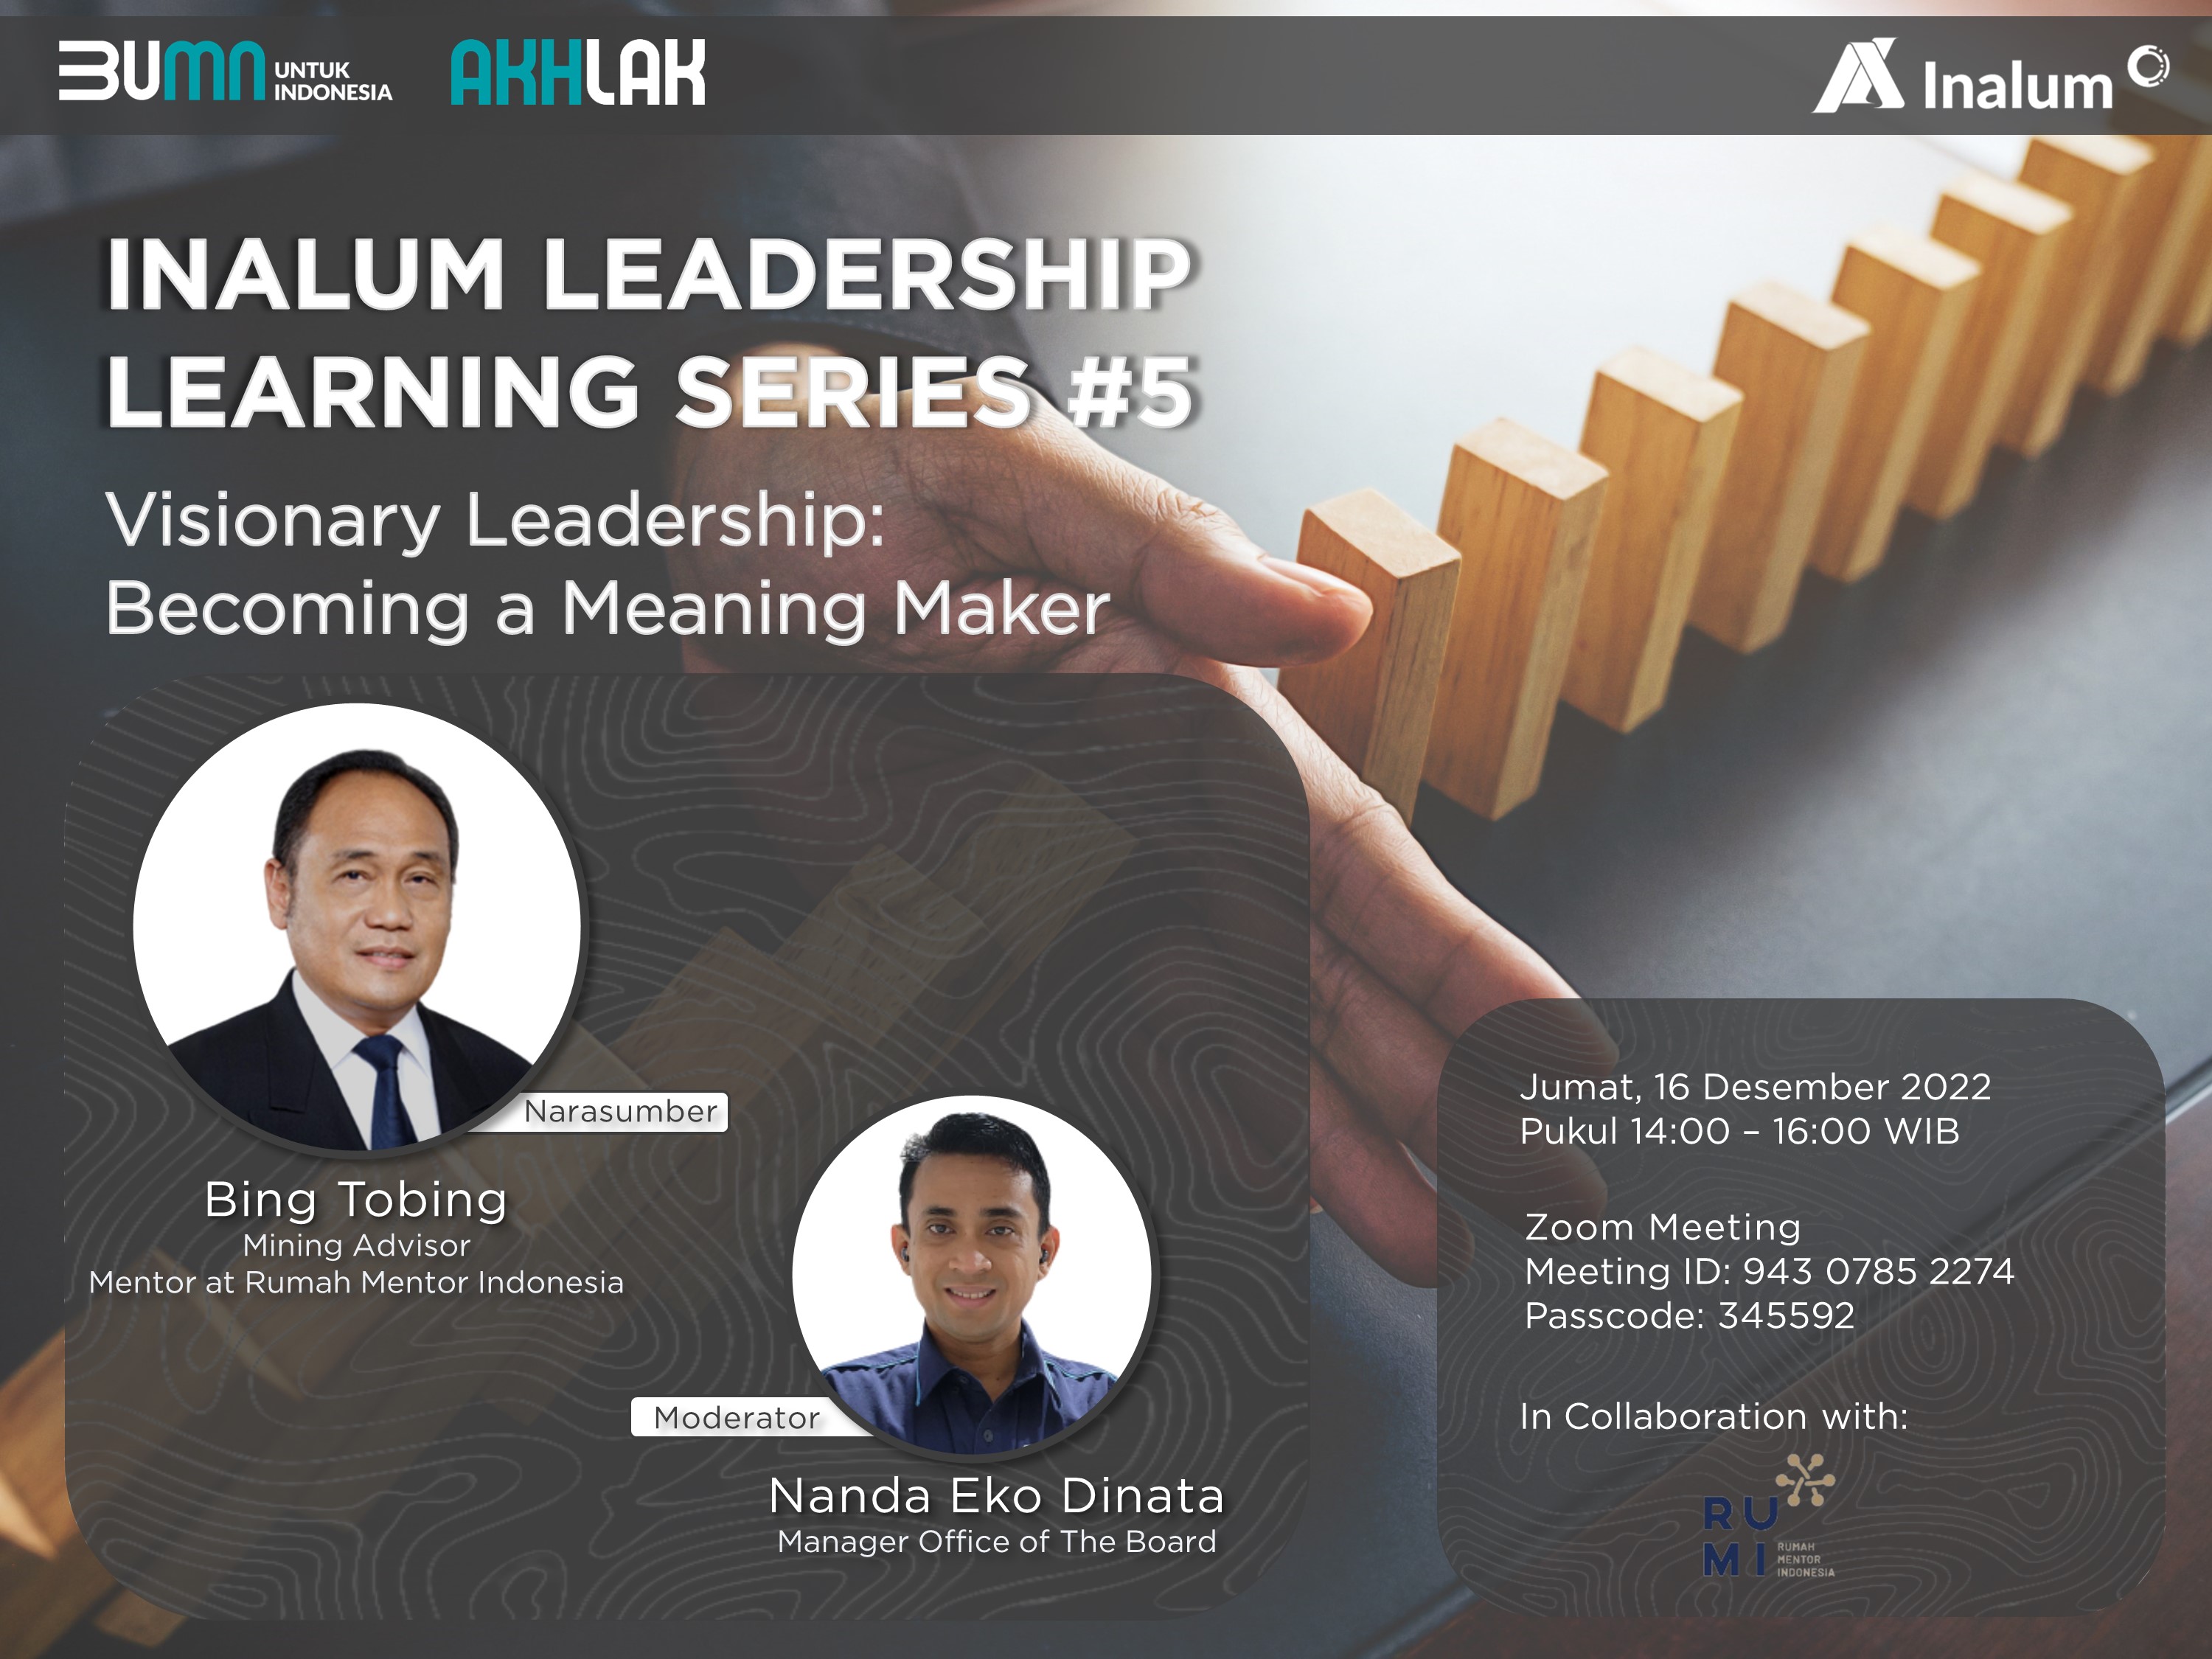 INALUM Leadership Learning Series #5 - Visionary Leadership: Becoming a Meaning Maker